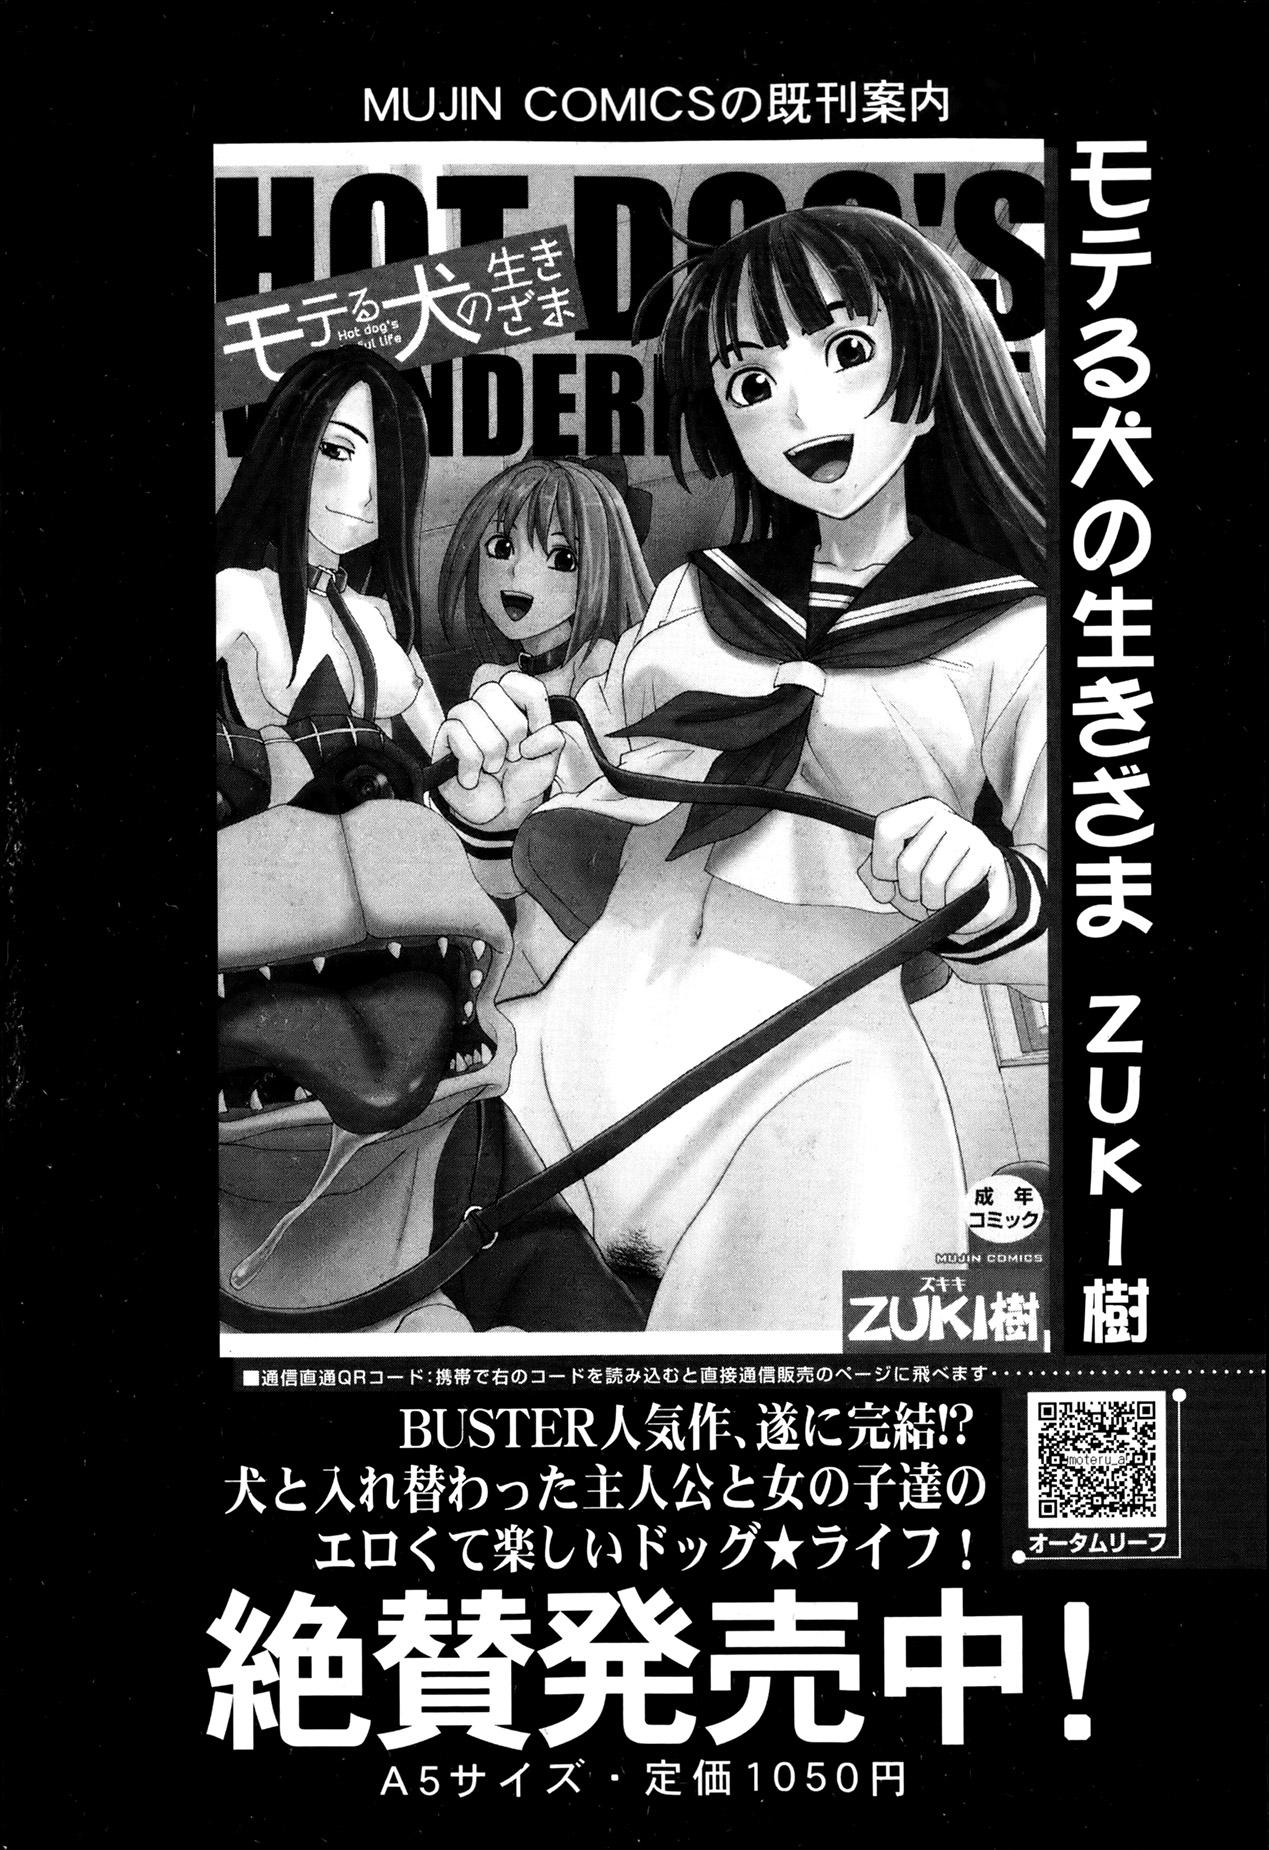 BUSTER COMIC 2013-07 187